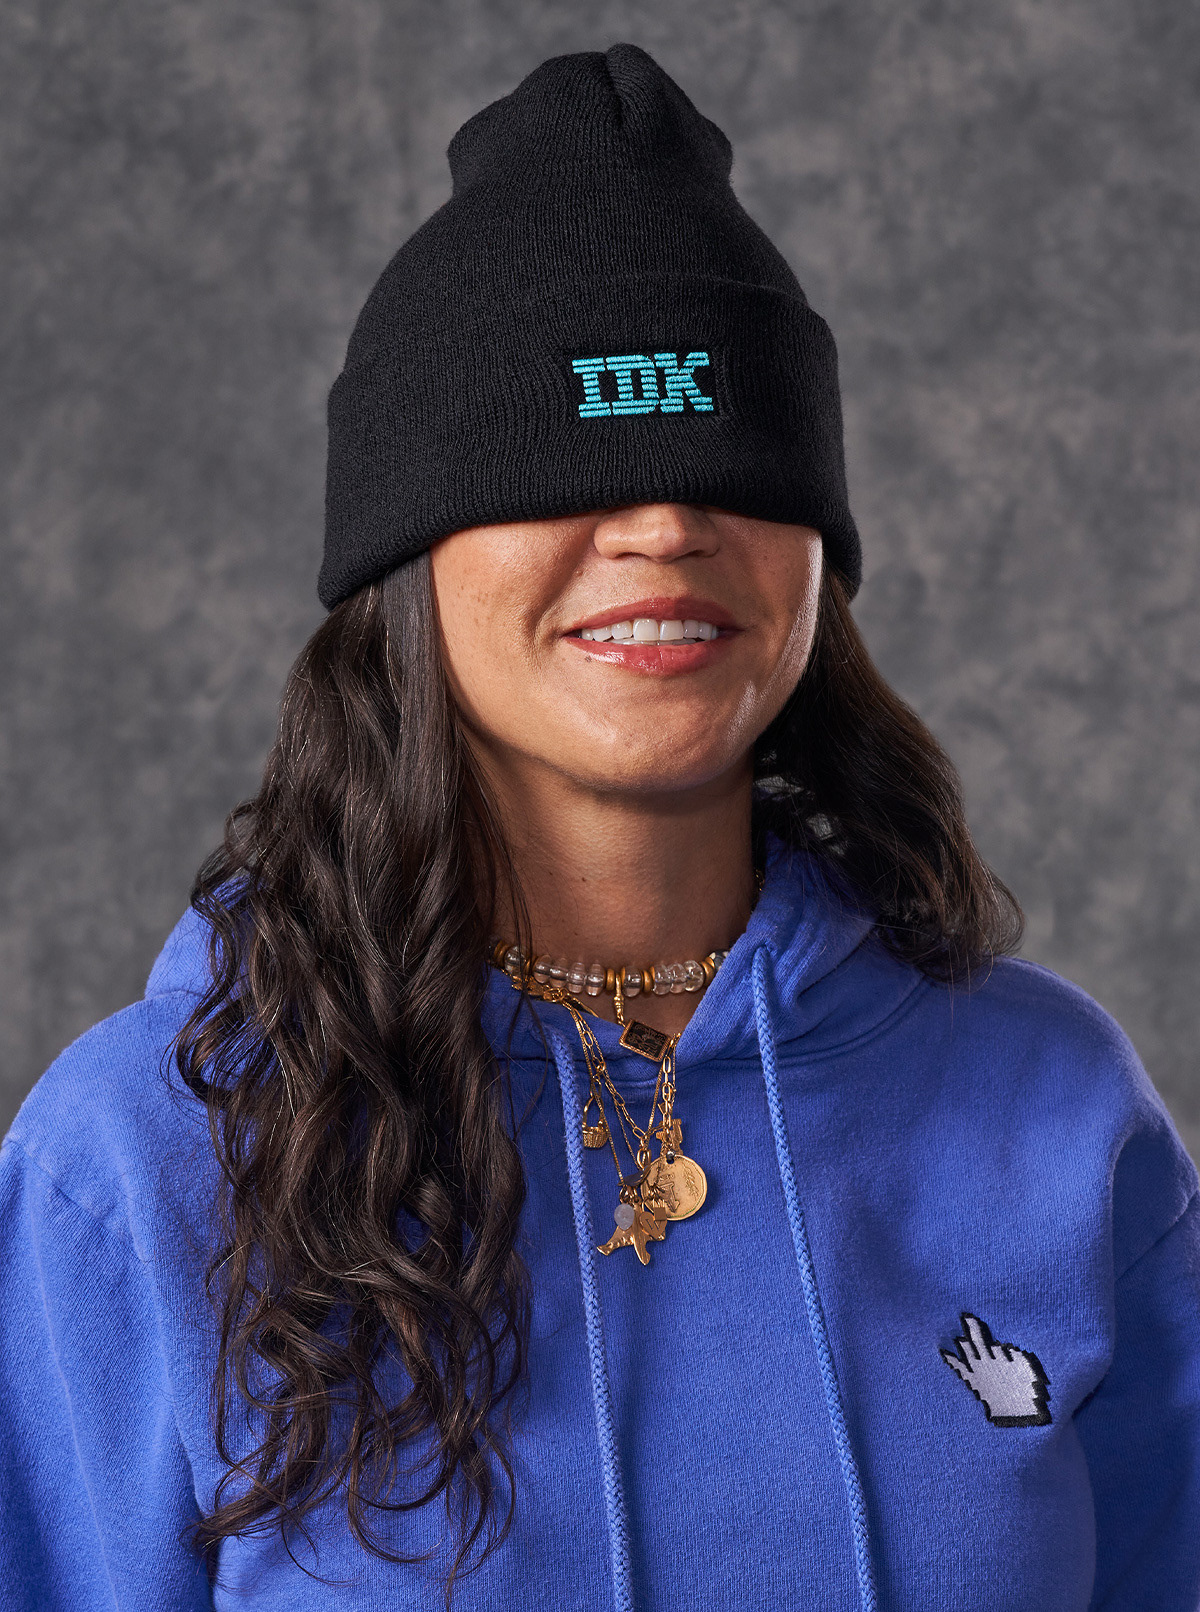 Custom IDK beanie and Purple Middle finger cursor hoodie for GIPHY